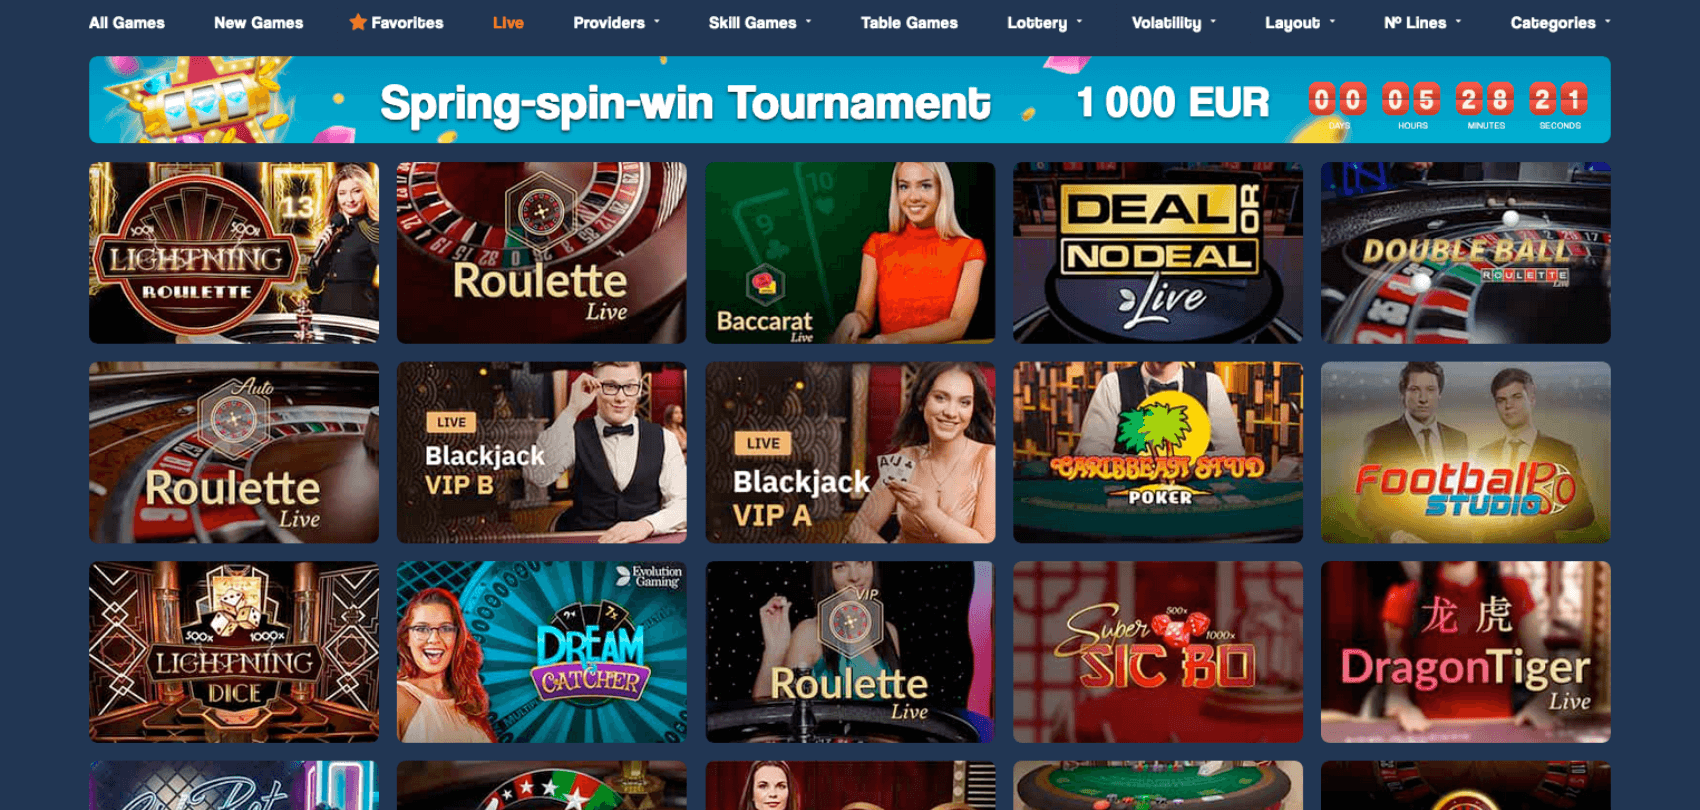 live casino section on Richprize